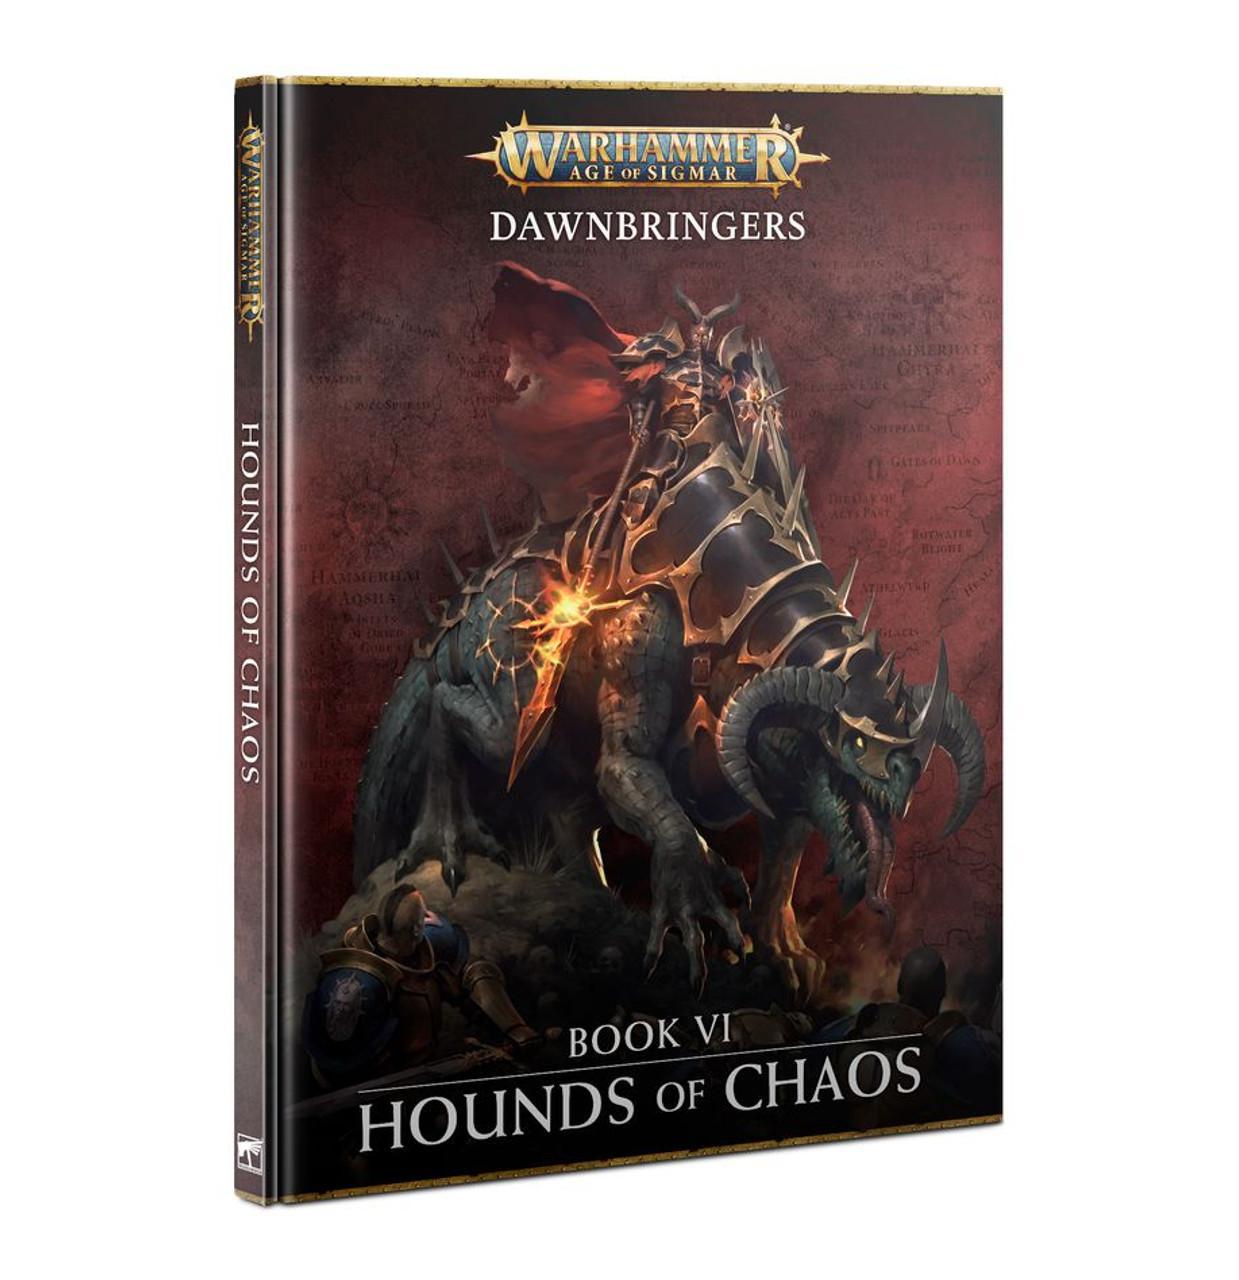 Hounds of Chaos Book VI